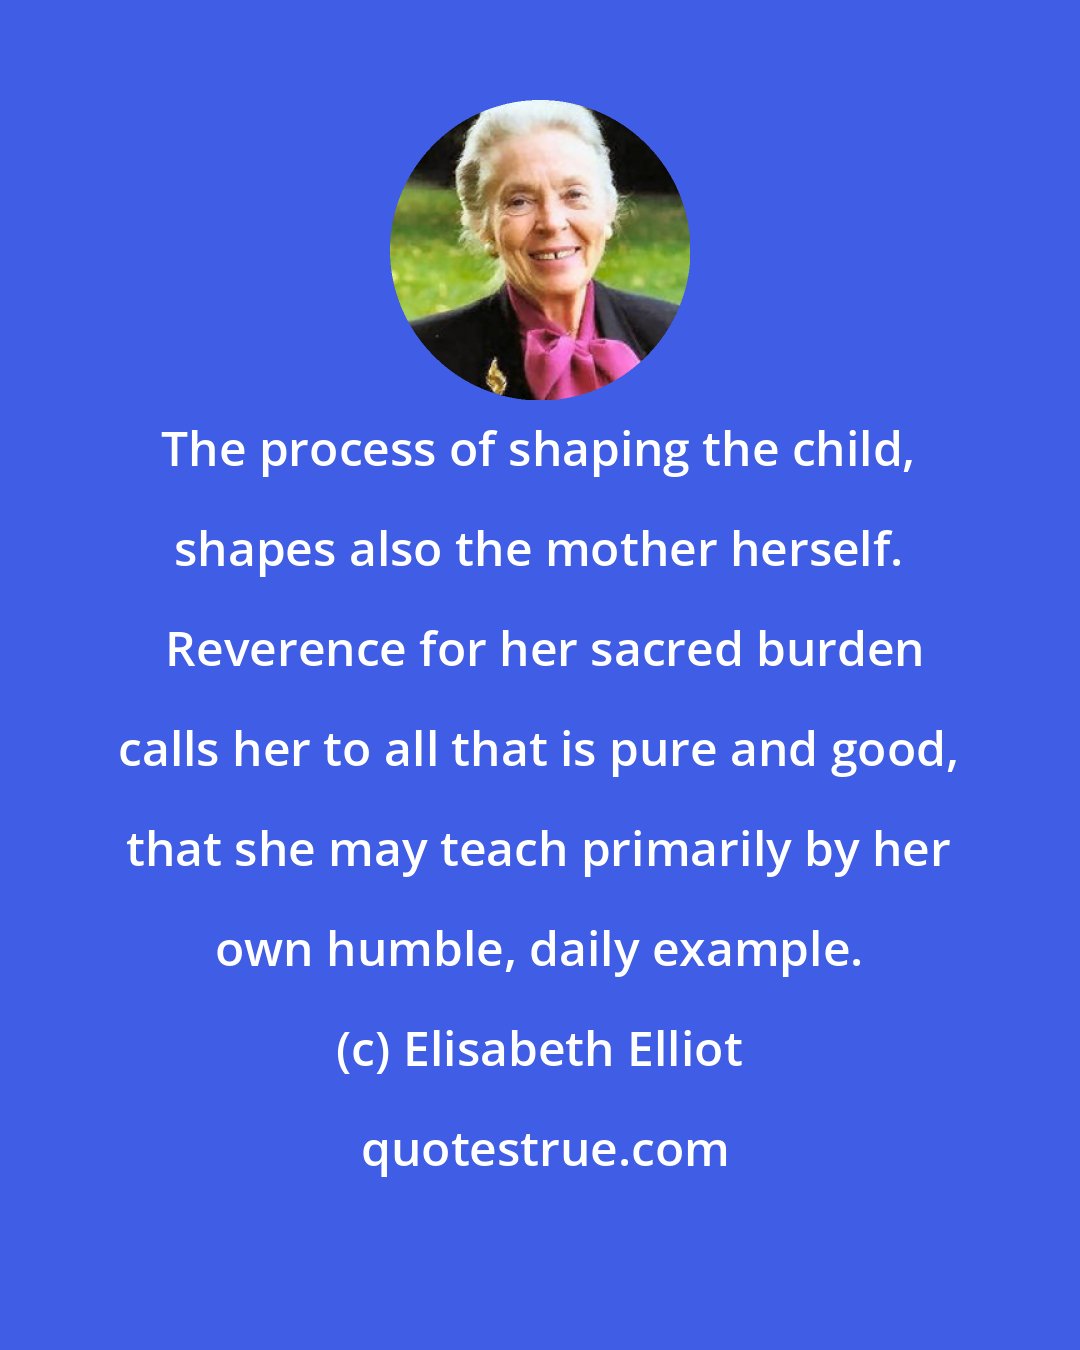 Elisabeth Elliot: The process of shaping the child, shapes also the mother herself.  Reverence for her sacred burden calls her to all that is pure and good, that she may teach primarily by her own humble, daily example.